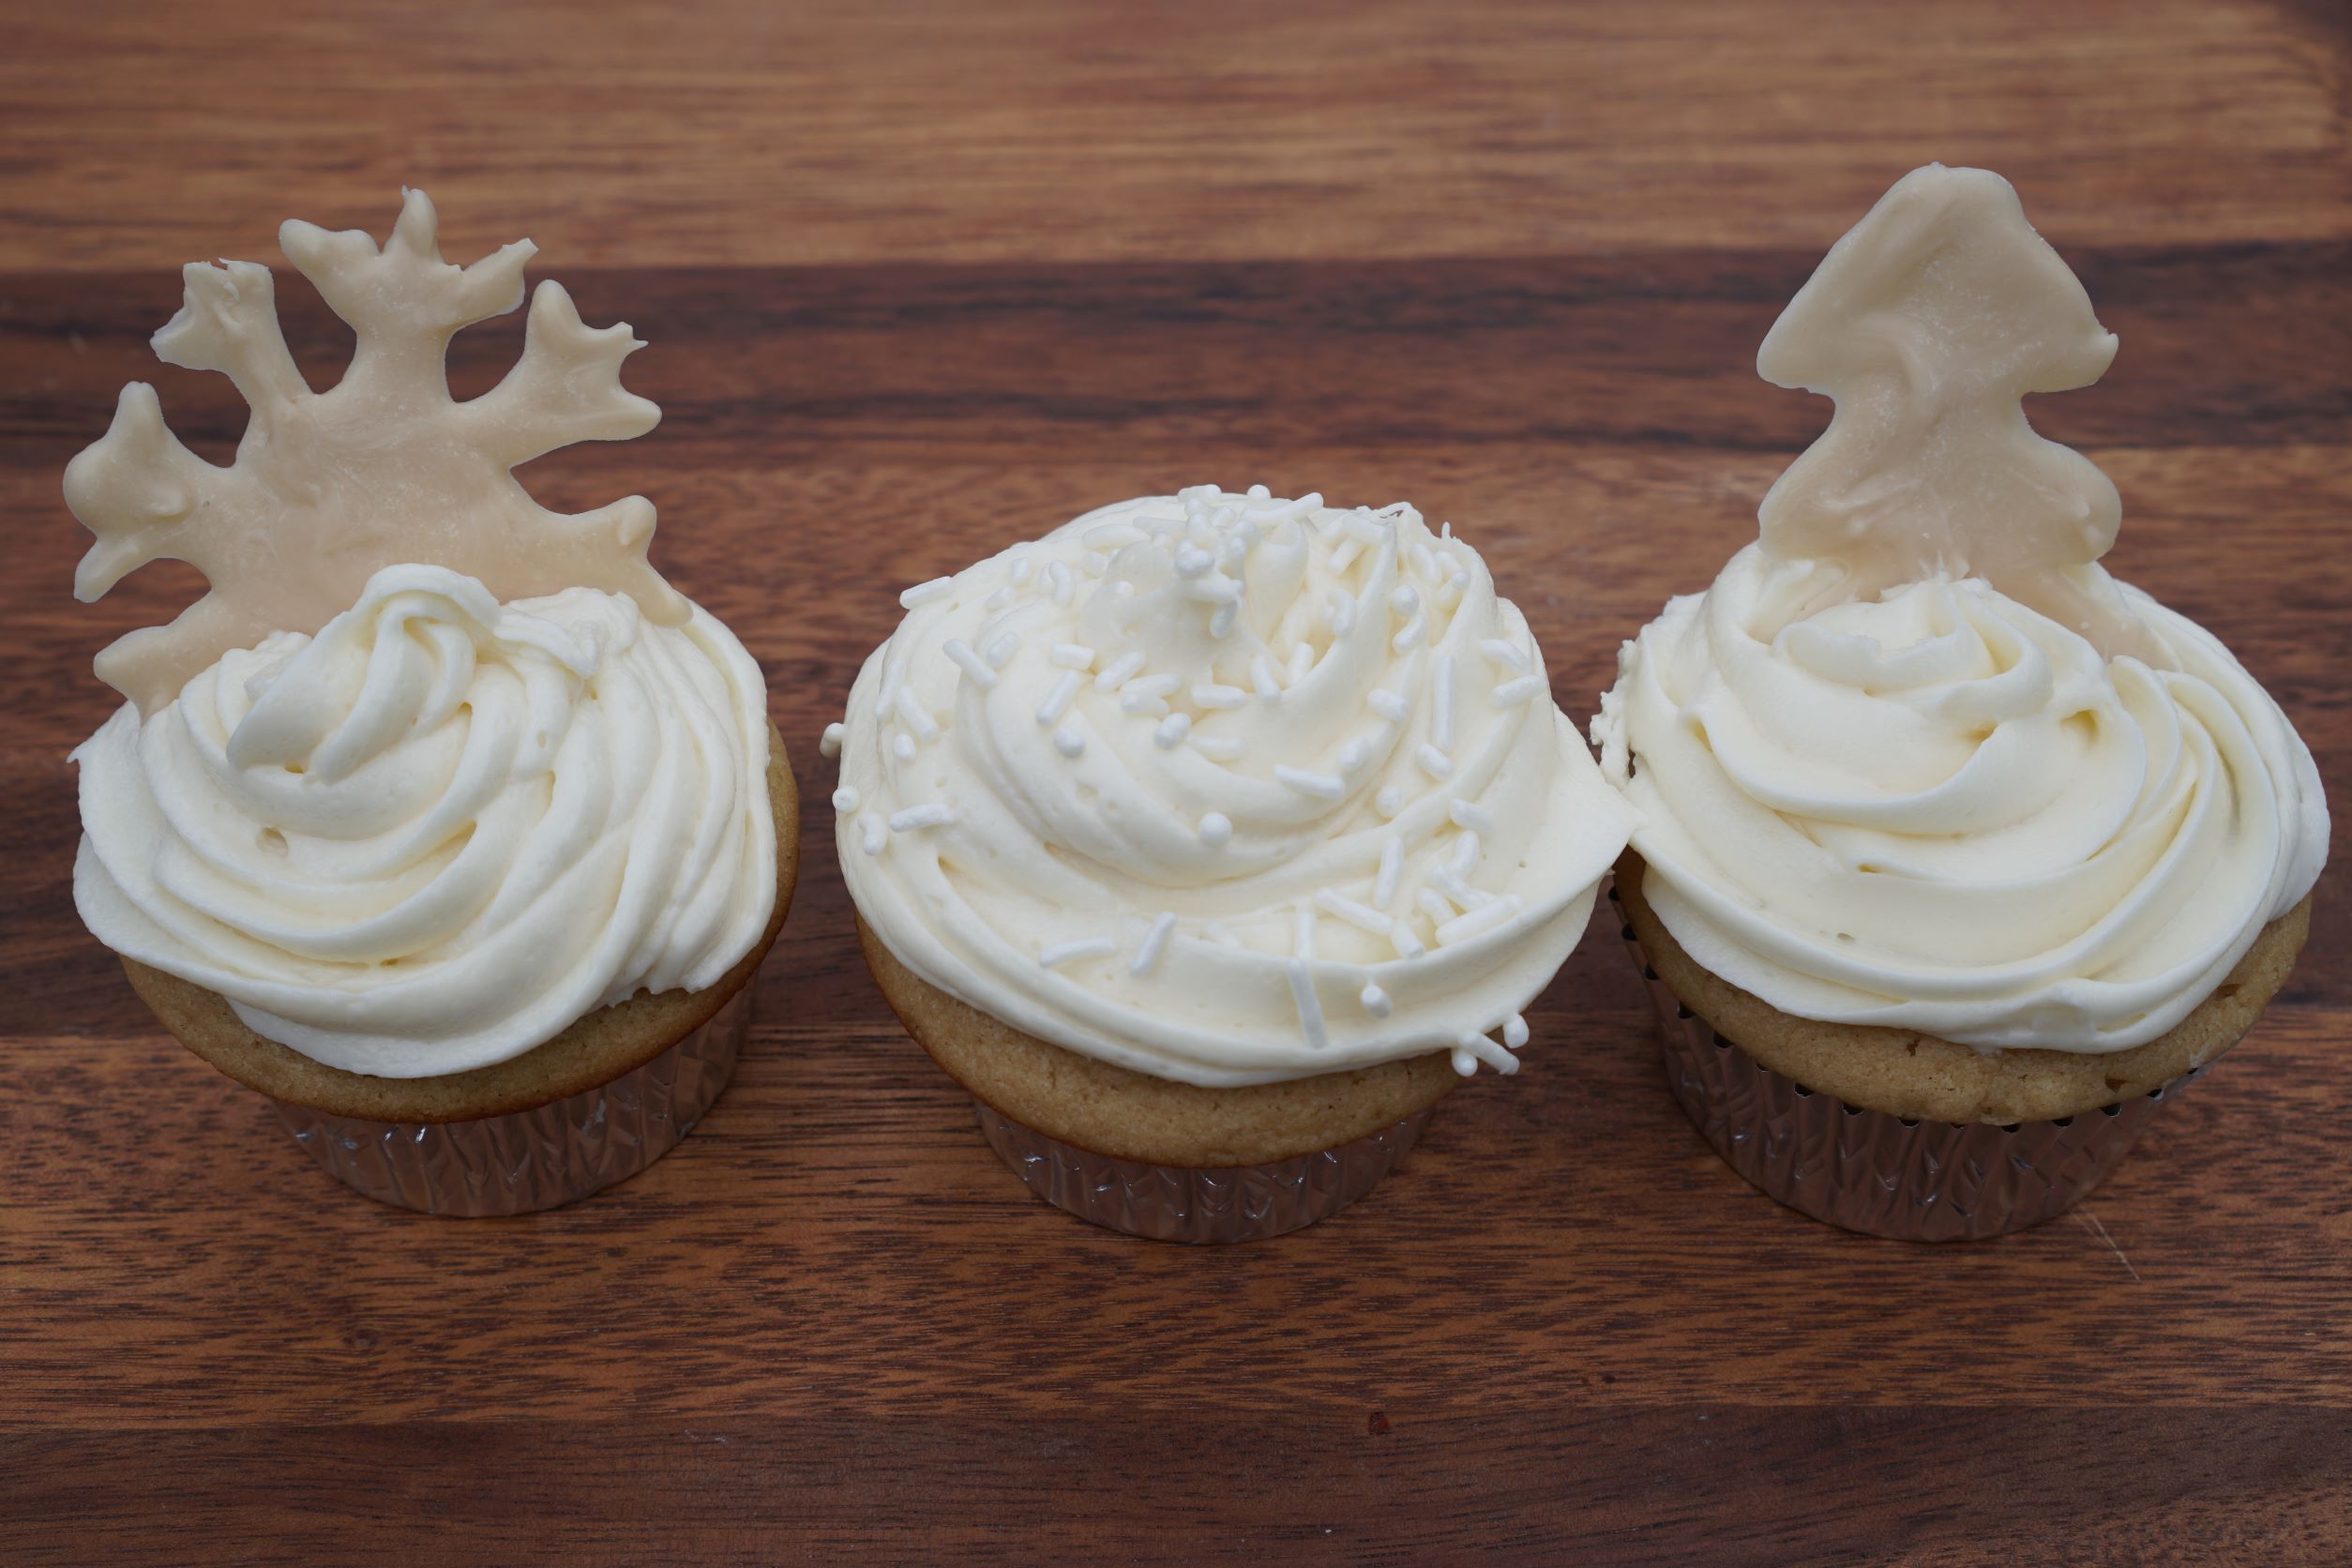 Maple Cupcakes with Marshmallow Frosting (Egg-free!)